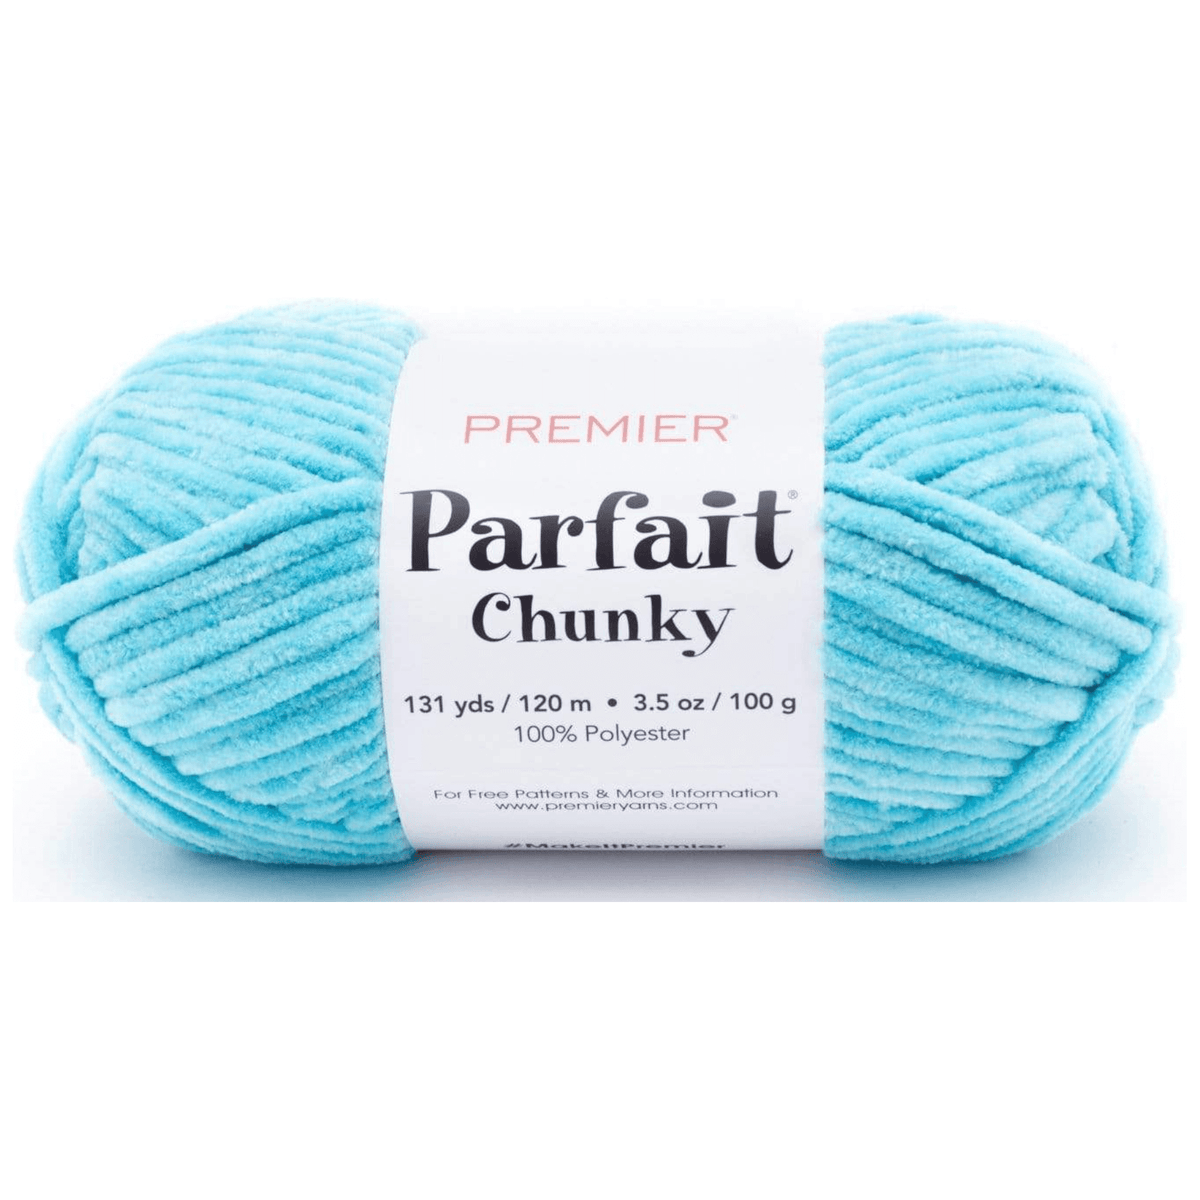 ISO premier parfait chunky yarn in sunshine. I have more coming from premier  but it takes 7+ business days so I was recommended to check here! If anyone  has some rolls they